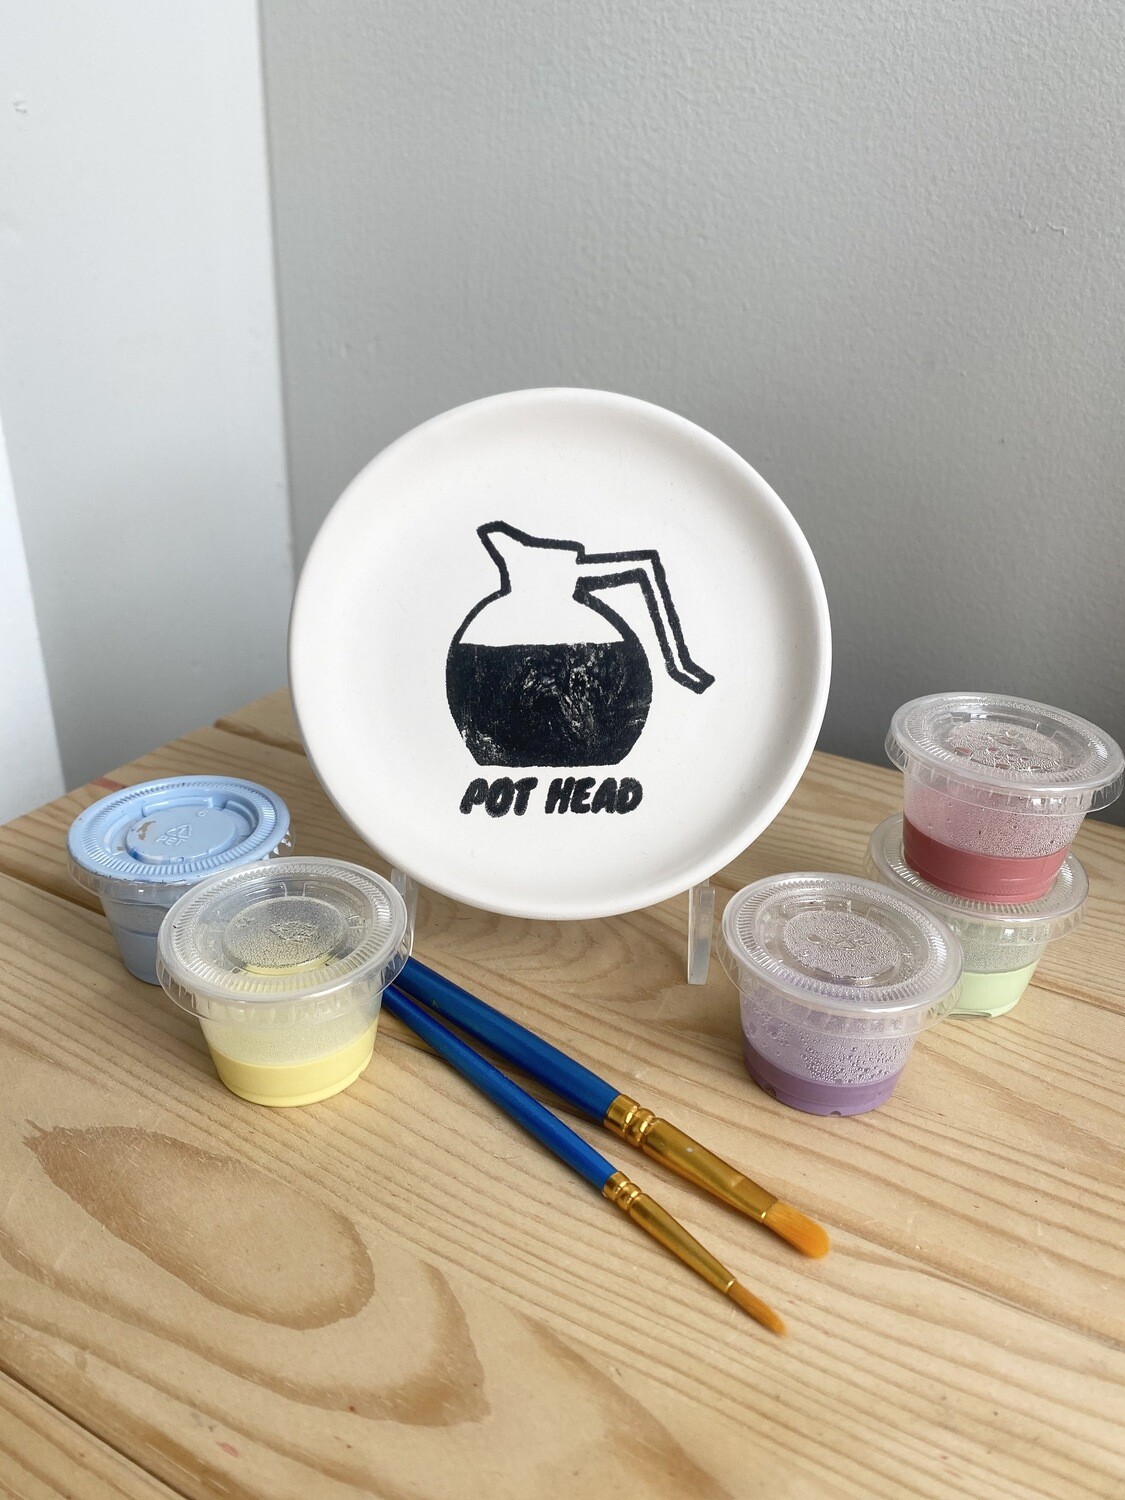 Take Home Coloring Book Pothead Dish/Coaster with Glazes